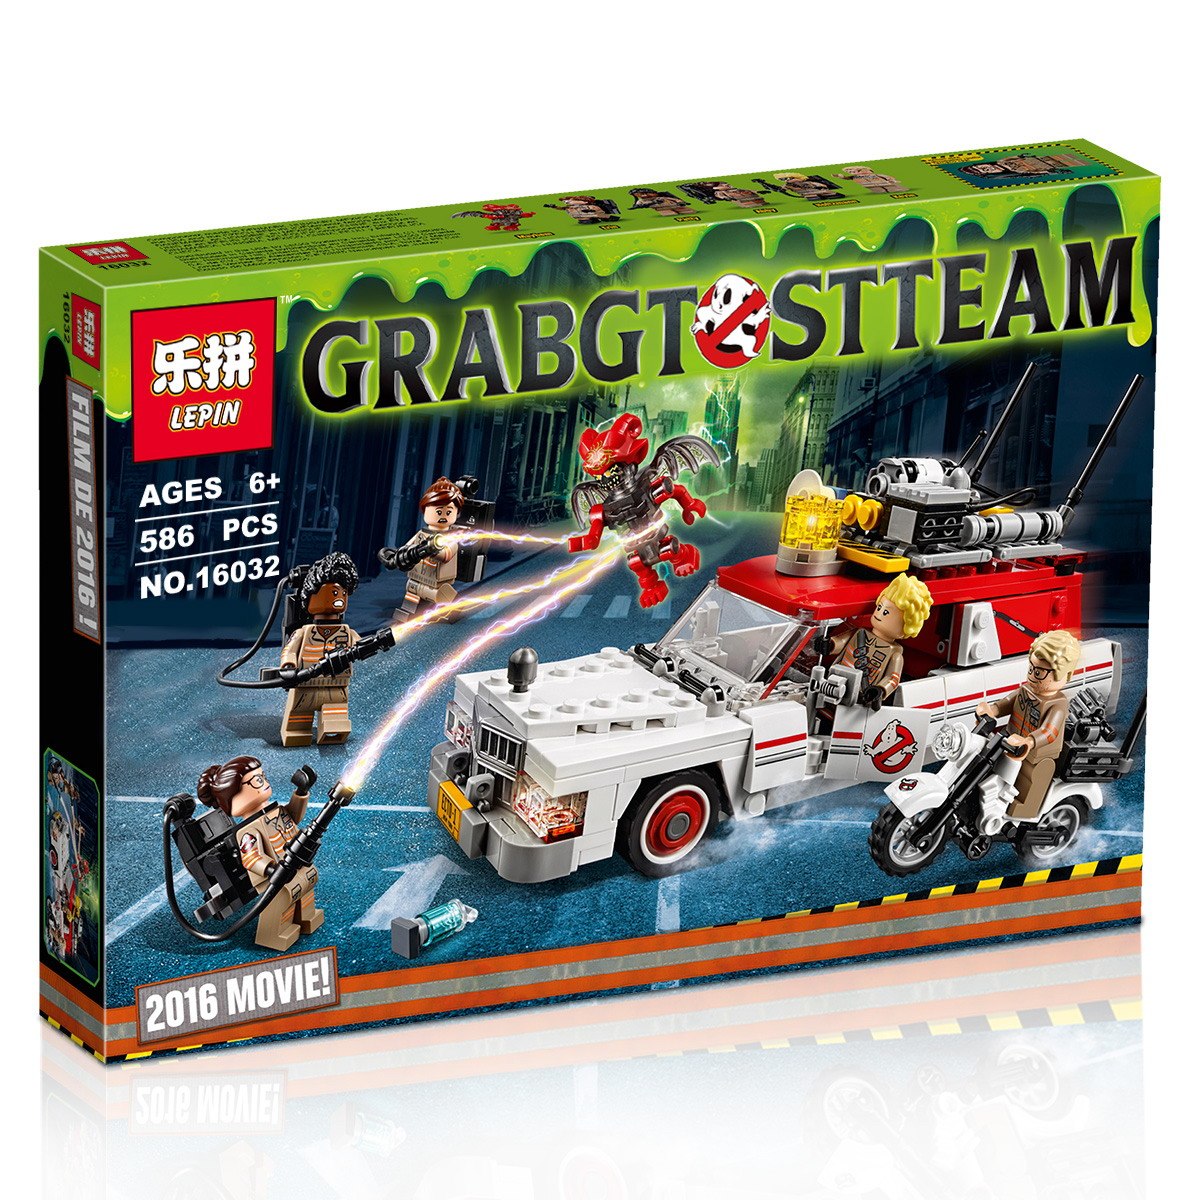 LEPIN 16032 GHOSTBUSTERS ECTO-1 & ECTO-2